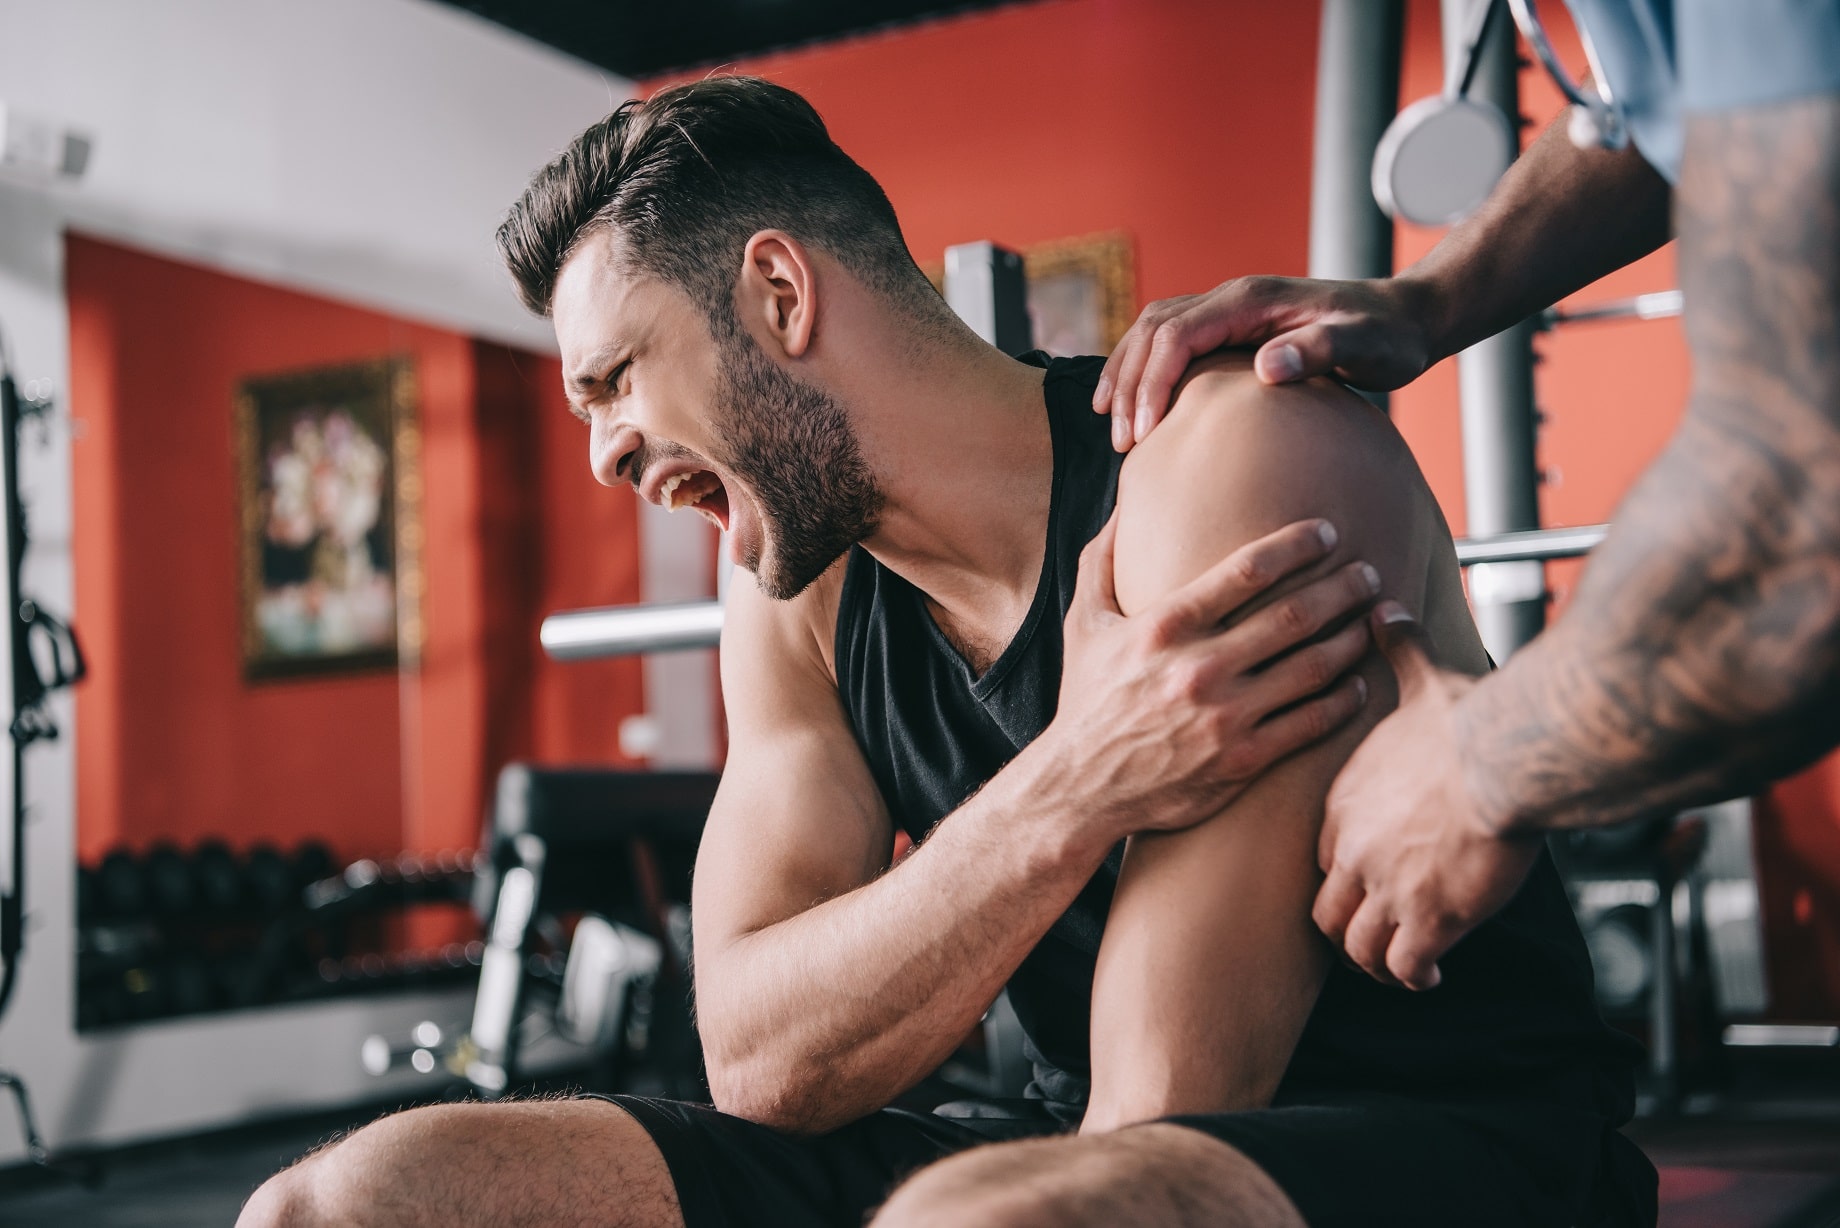 How Can You Tell If You Have a Dislocated Shoulder?